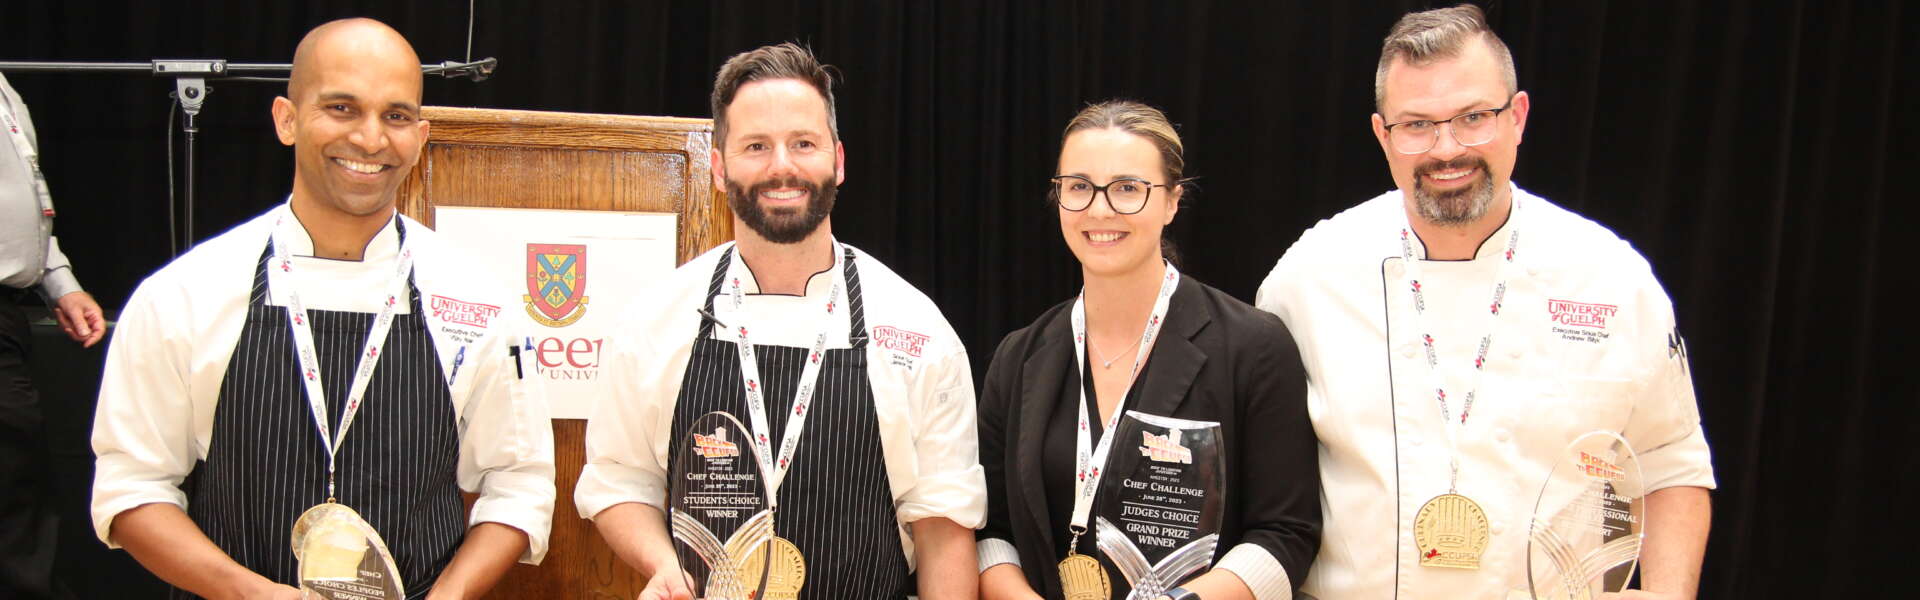 Four people stand in a row holding silver medals from a chef's competition.